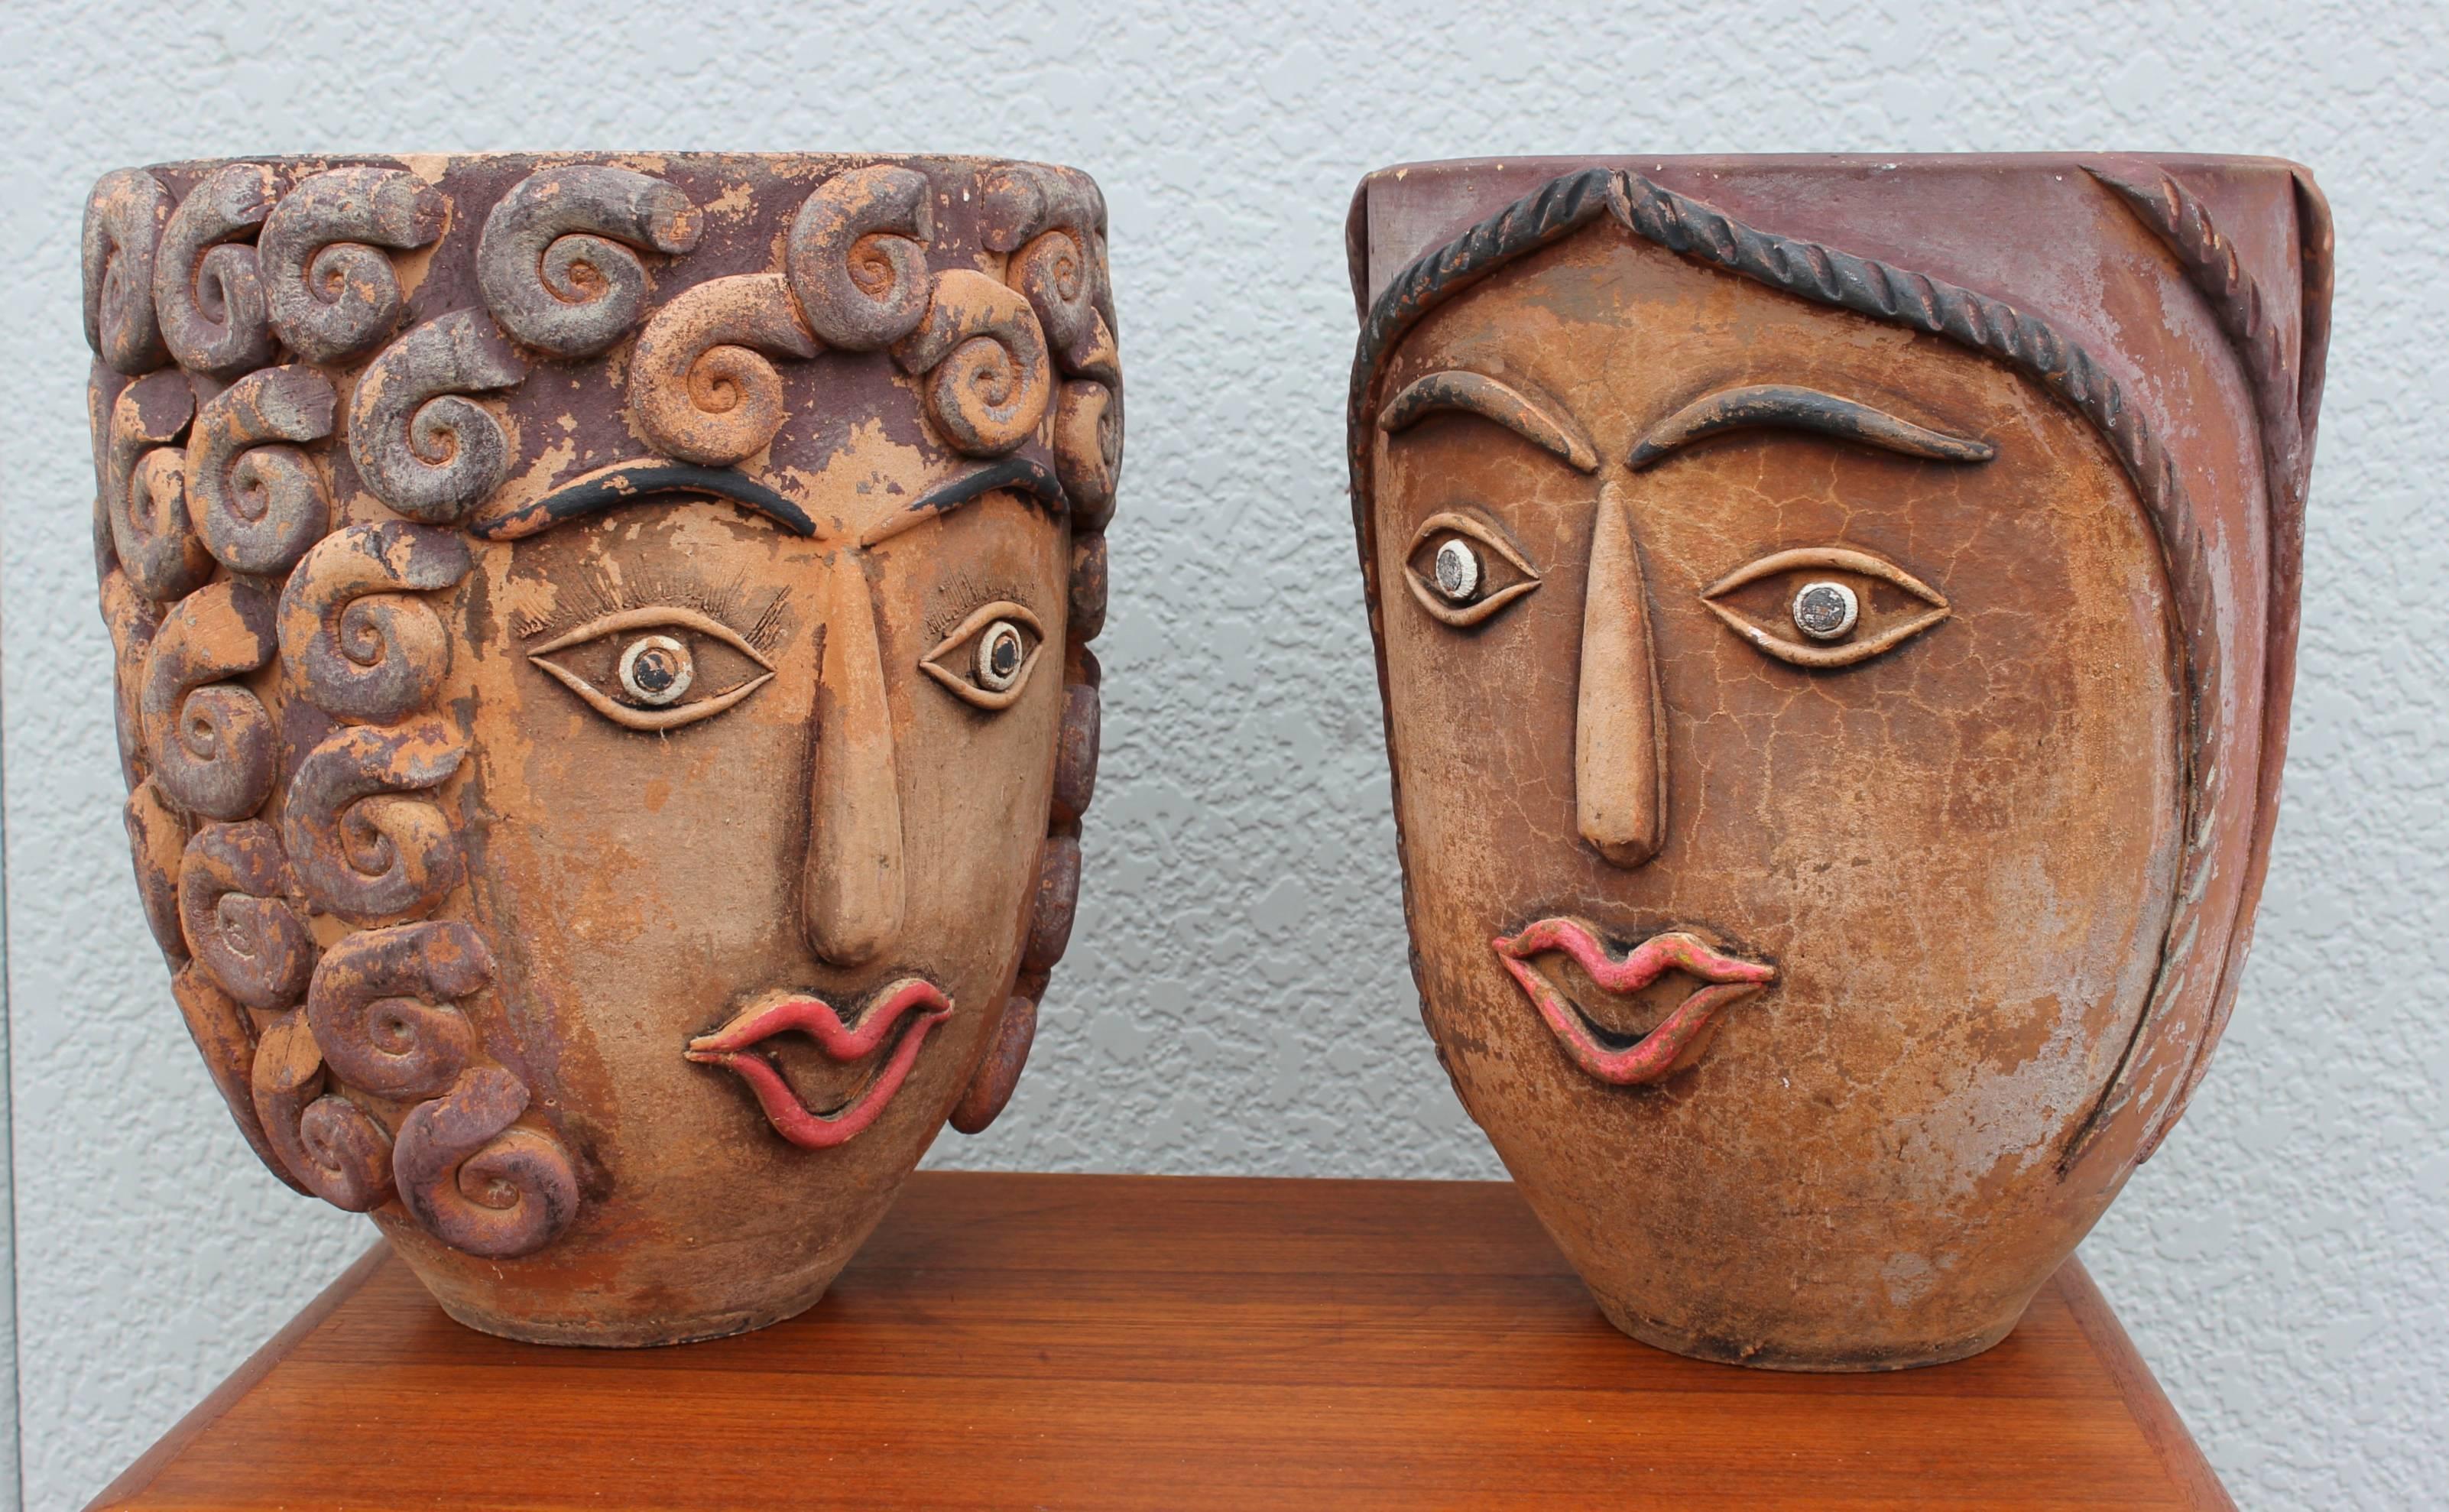 1960s Mexican terra cotta face planters, one of them has a face to each side.

One of the planters is slightly smaller.

Diameter 11.5'' height 13.75''.